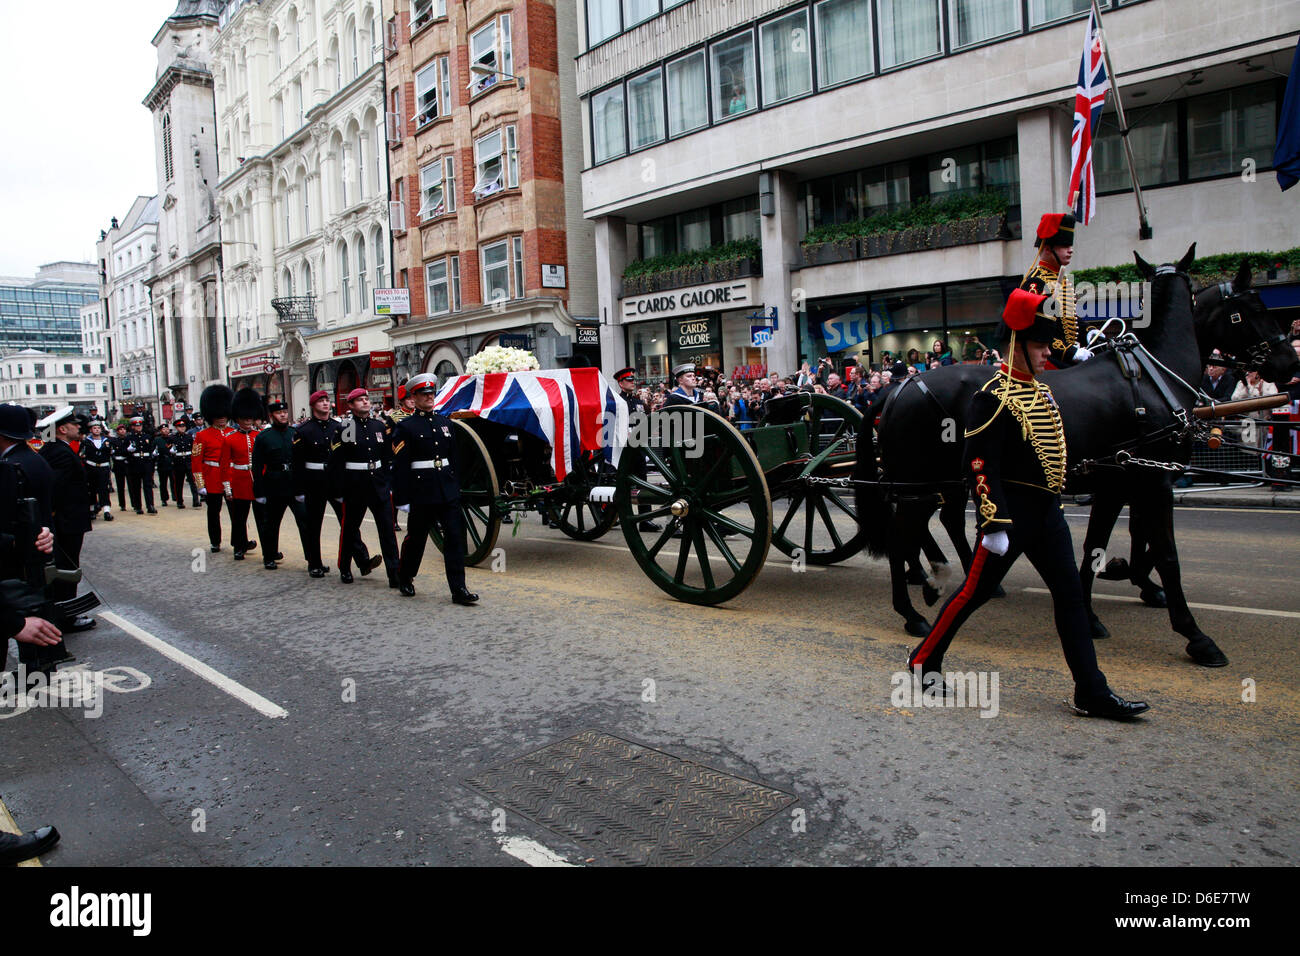 LONDON 17th of April 2013, The funeral of former prime minister Margaret Thatcher was held at St. Paul's Cathedral this morning. Coffin of Margaret Thatcher arriving at St. Paul's Cathedral on a gun carriage drawn by the King's Troop Royal Horse Artillery moving on Ludgate Hill. Stock Photo